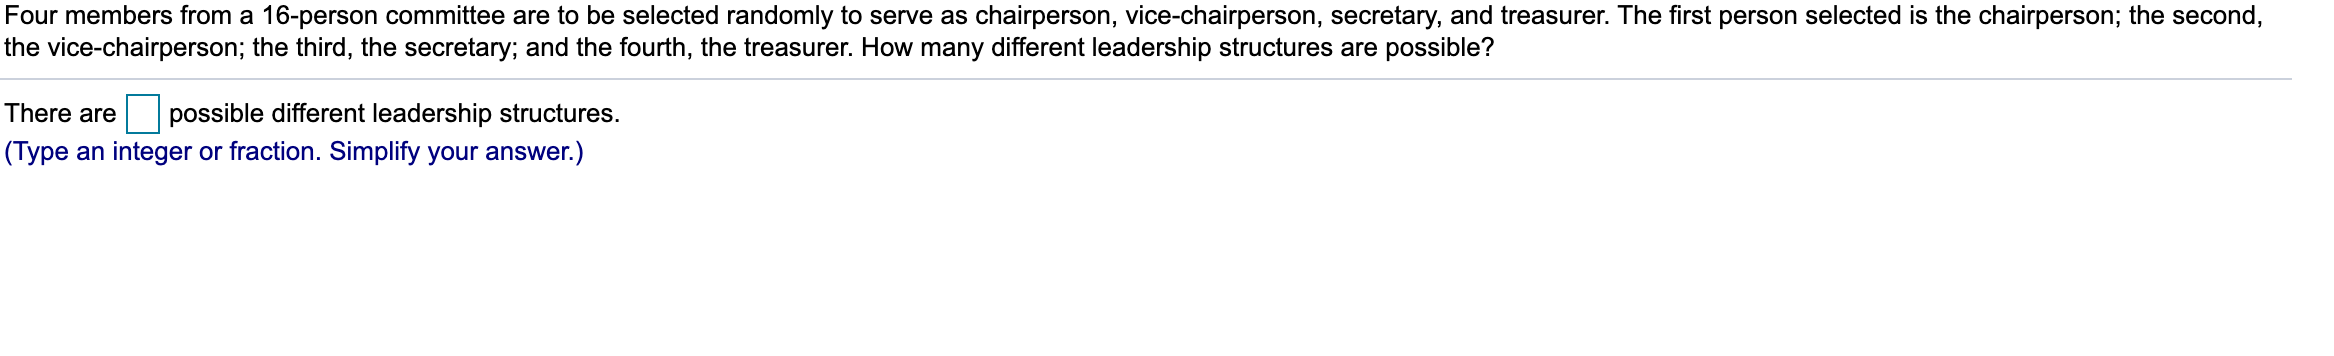 There are
possible different leadership structures.
Type an integer or fraction. Simplify your answer.)
